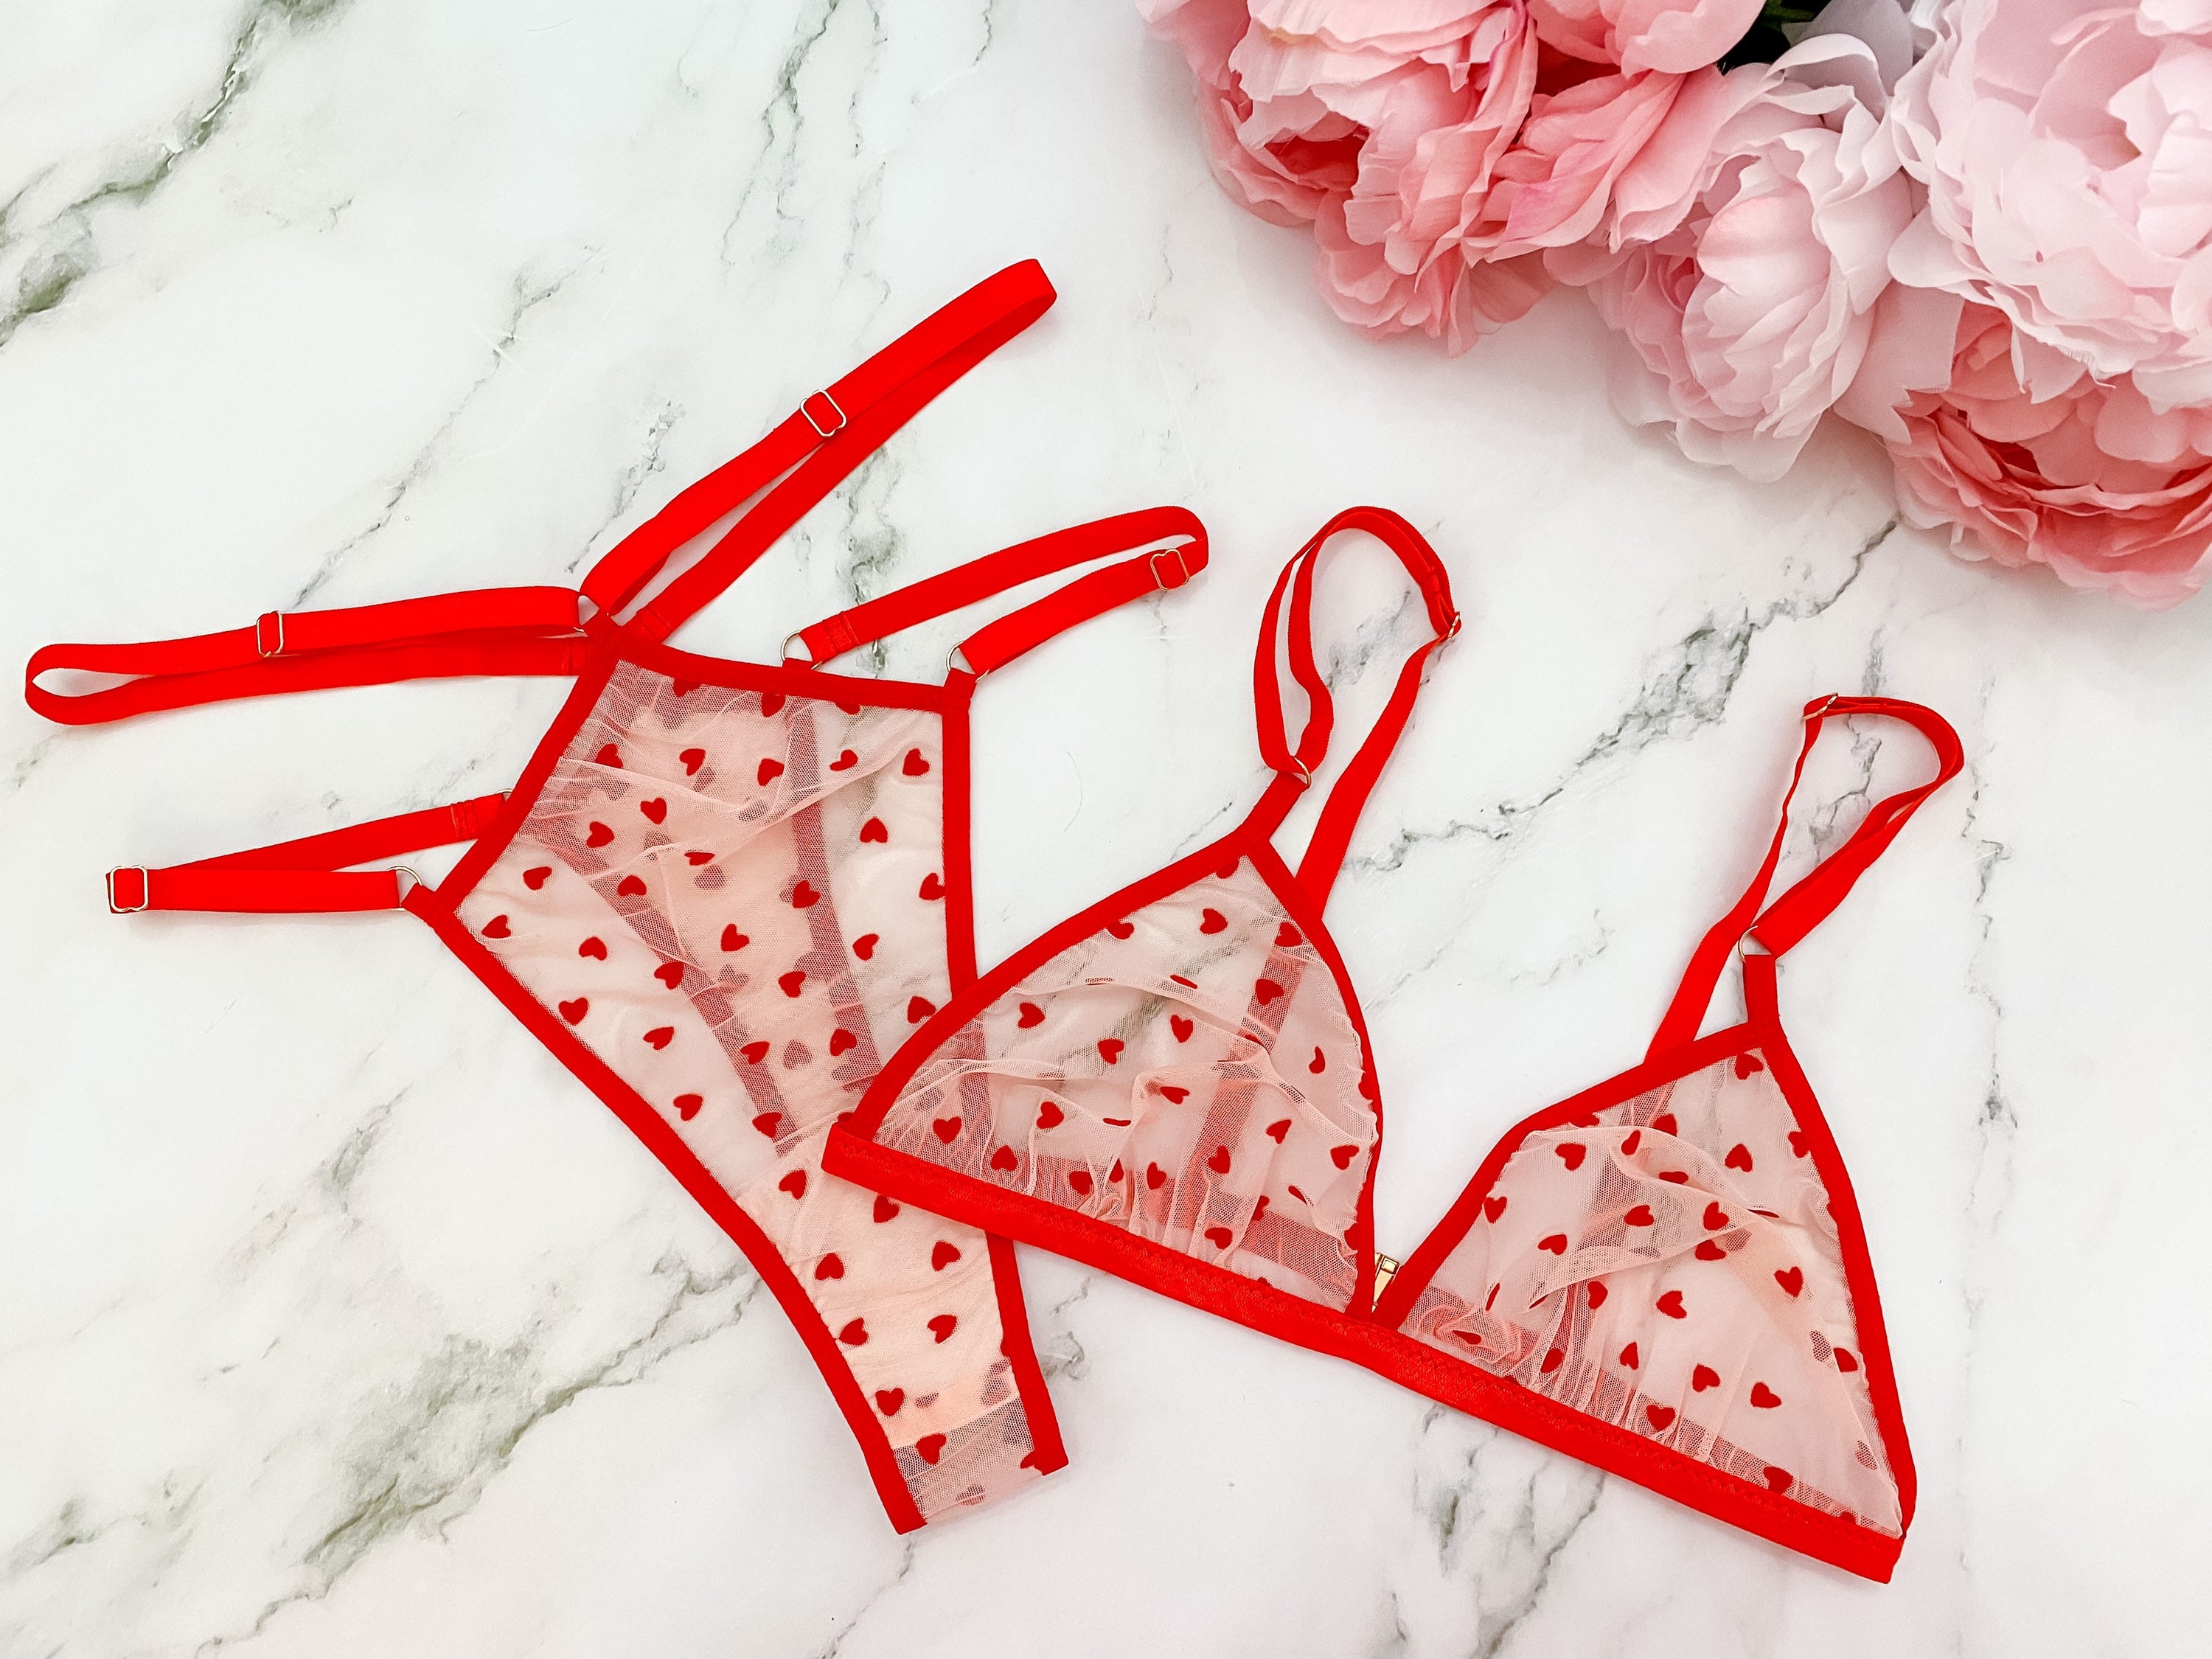 Flocked Velvet Red and Pink Heart Lingerie Set With Strappy Thong